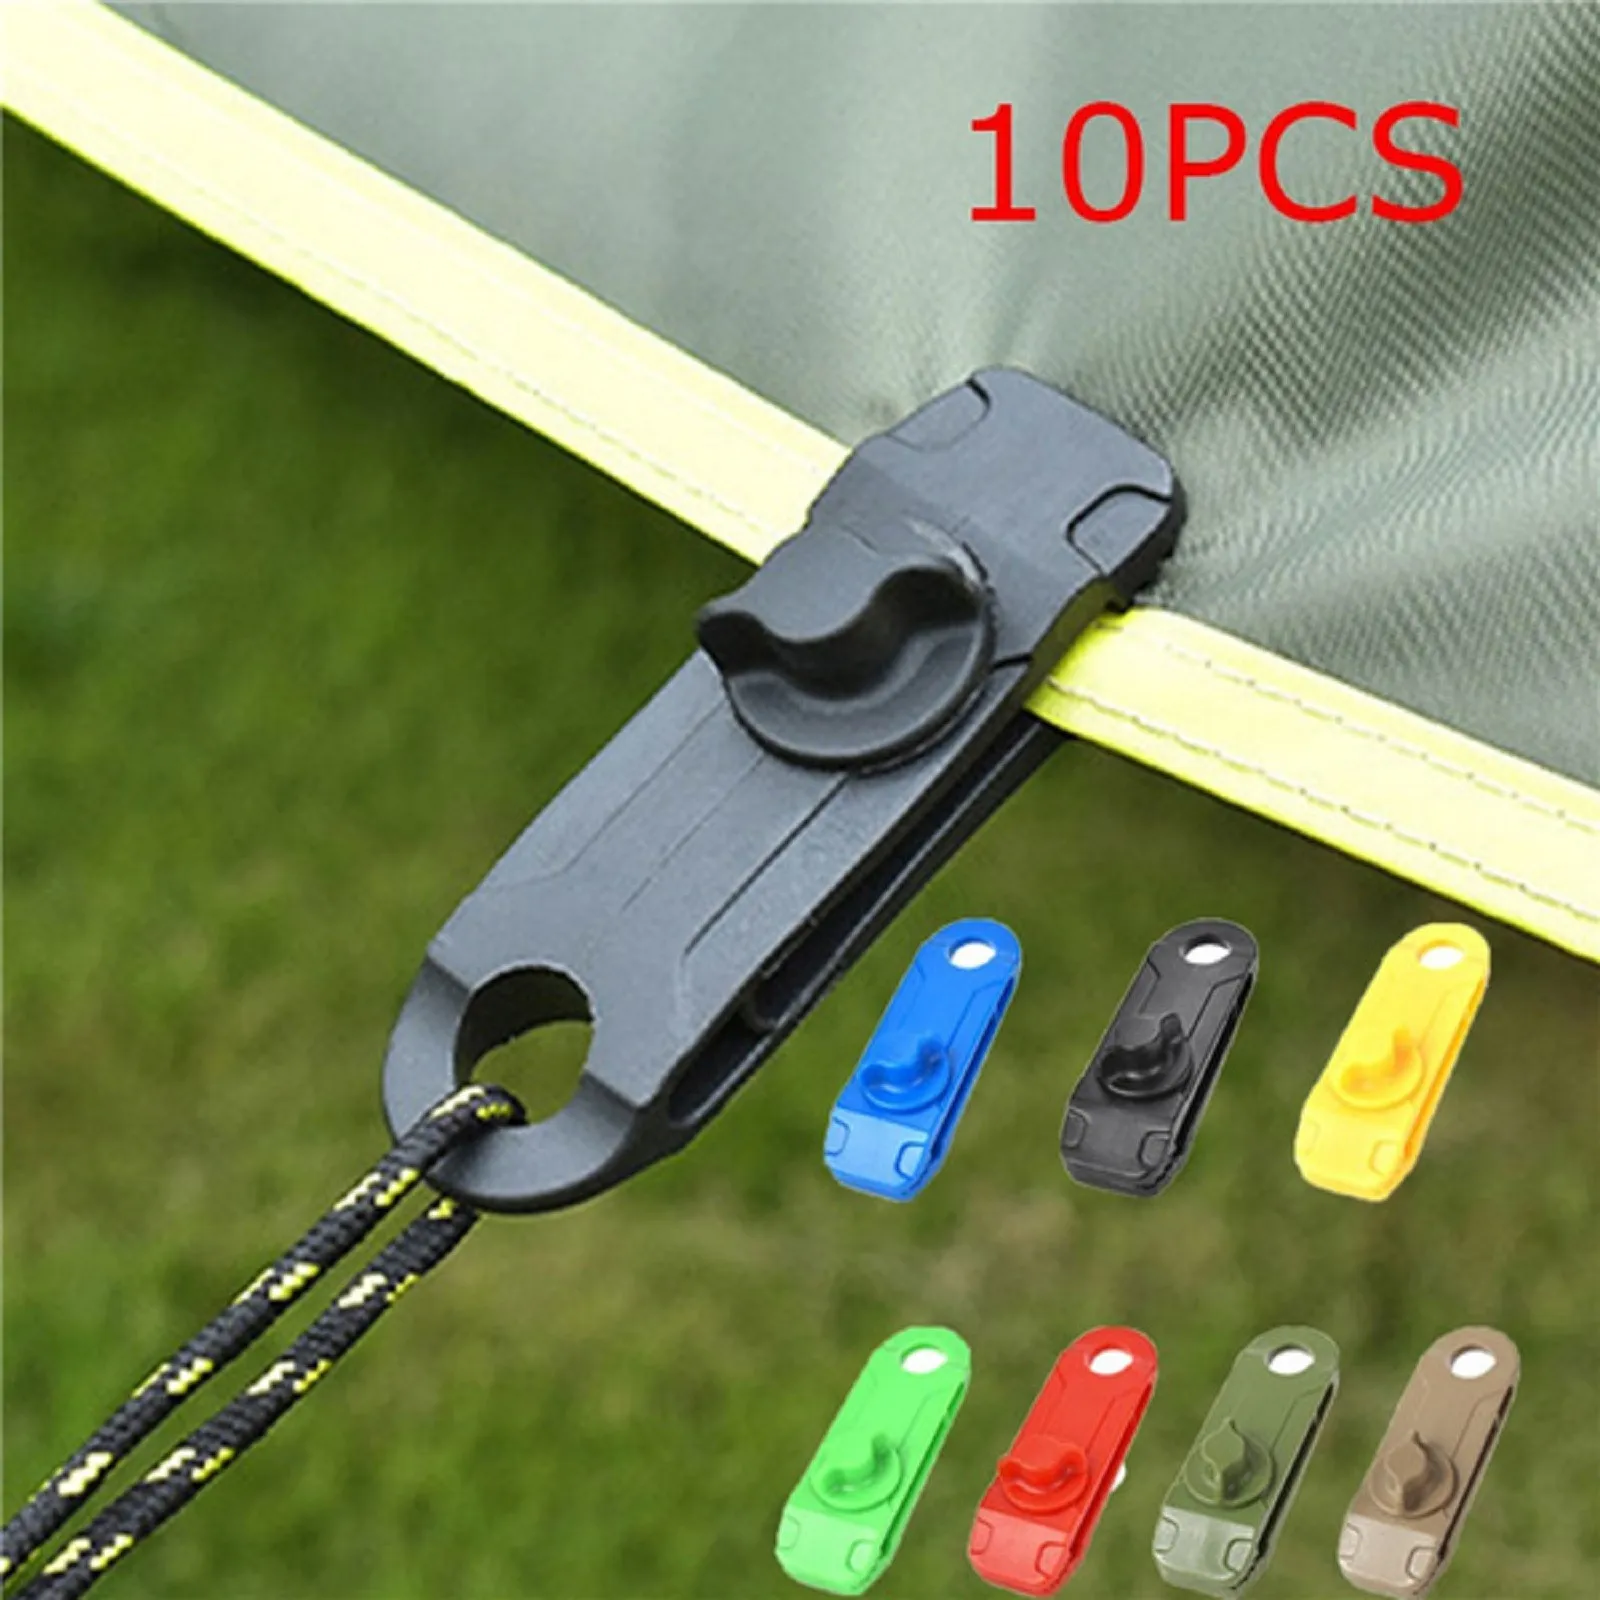 10 Camping Awning Canopy Clamp Kit Tarp Clips Snap Emergency Tent Tighten CG 